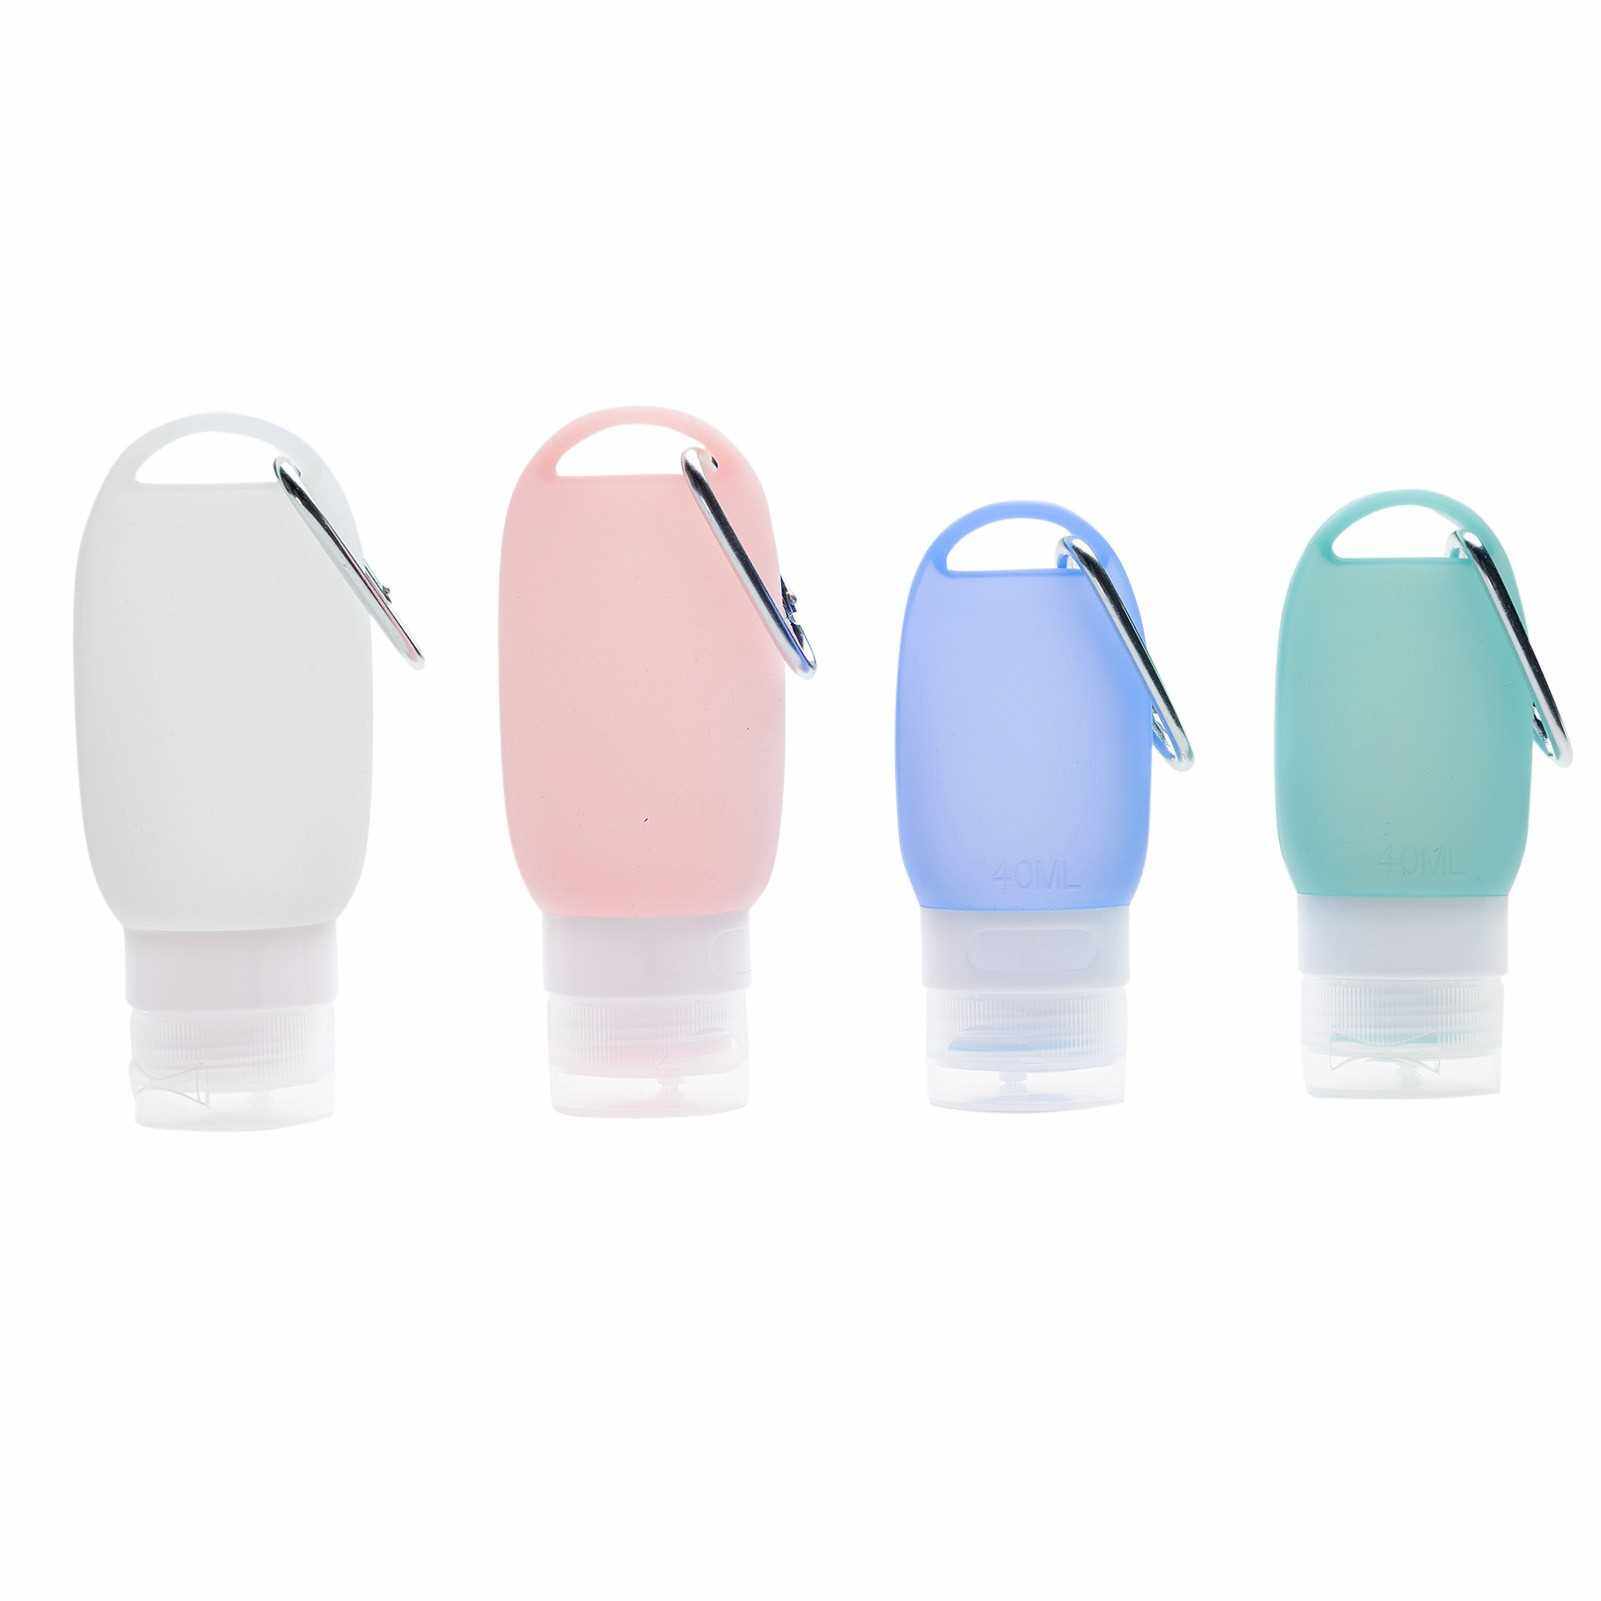 BEST SELLER 3PCS Travel Bottles with Snap Hook Hanging Soft Silicone Portable Refillable Empty Containers for Hand Sanitizer Shampoo Flip Cap School Work Outdoor (Blue)